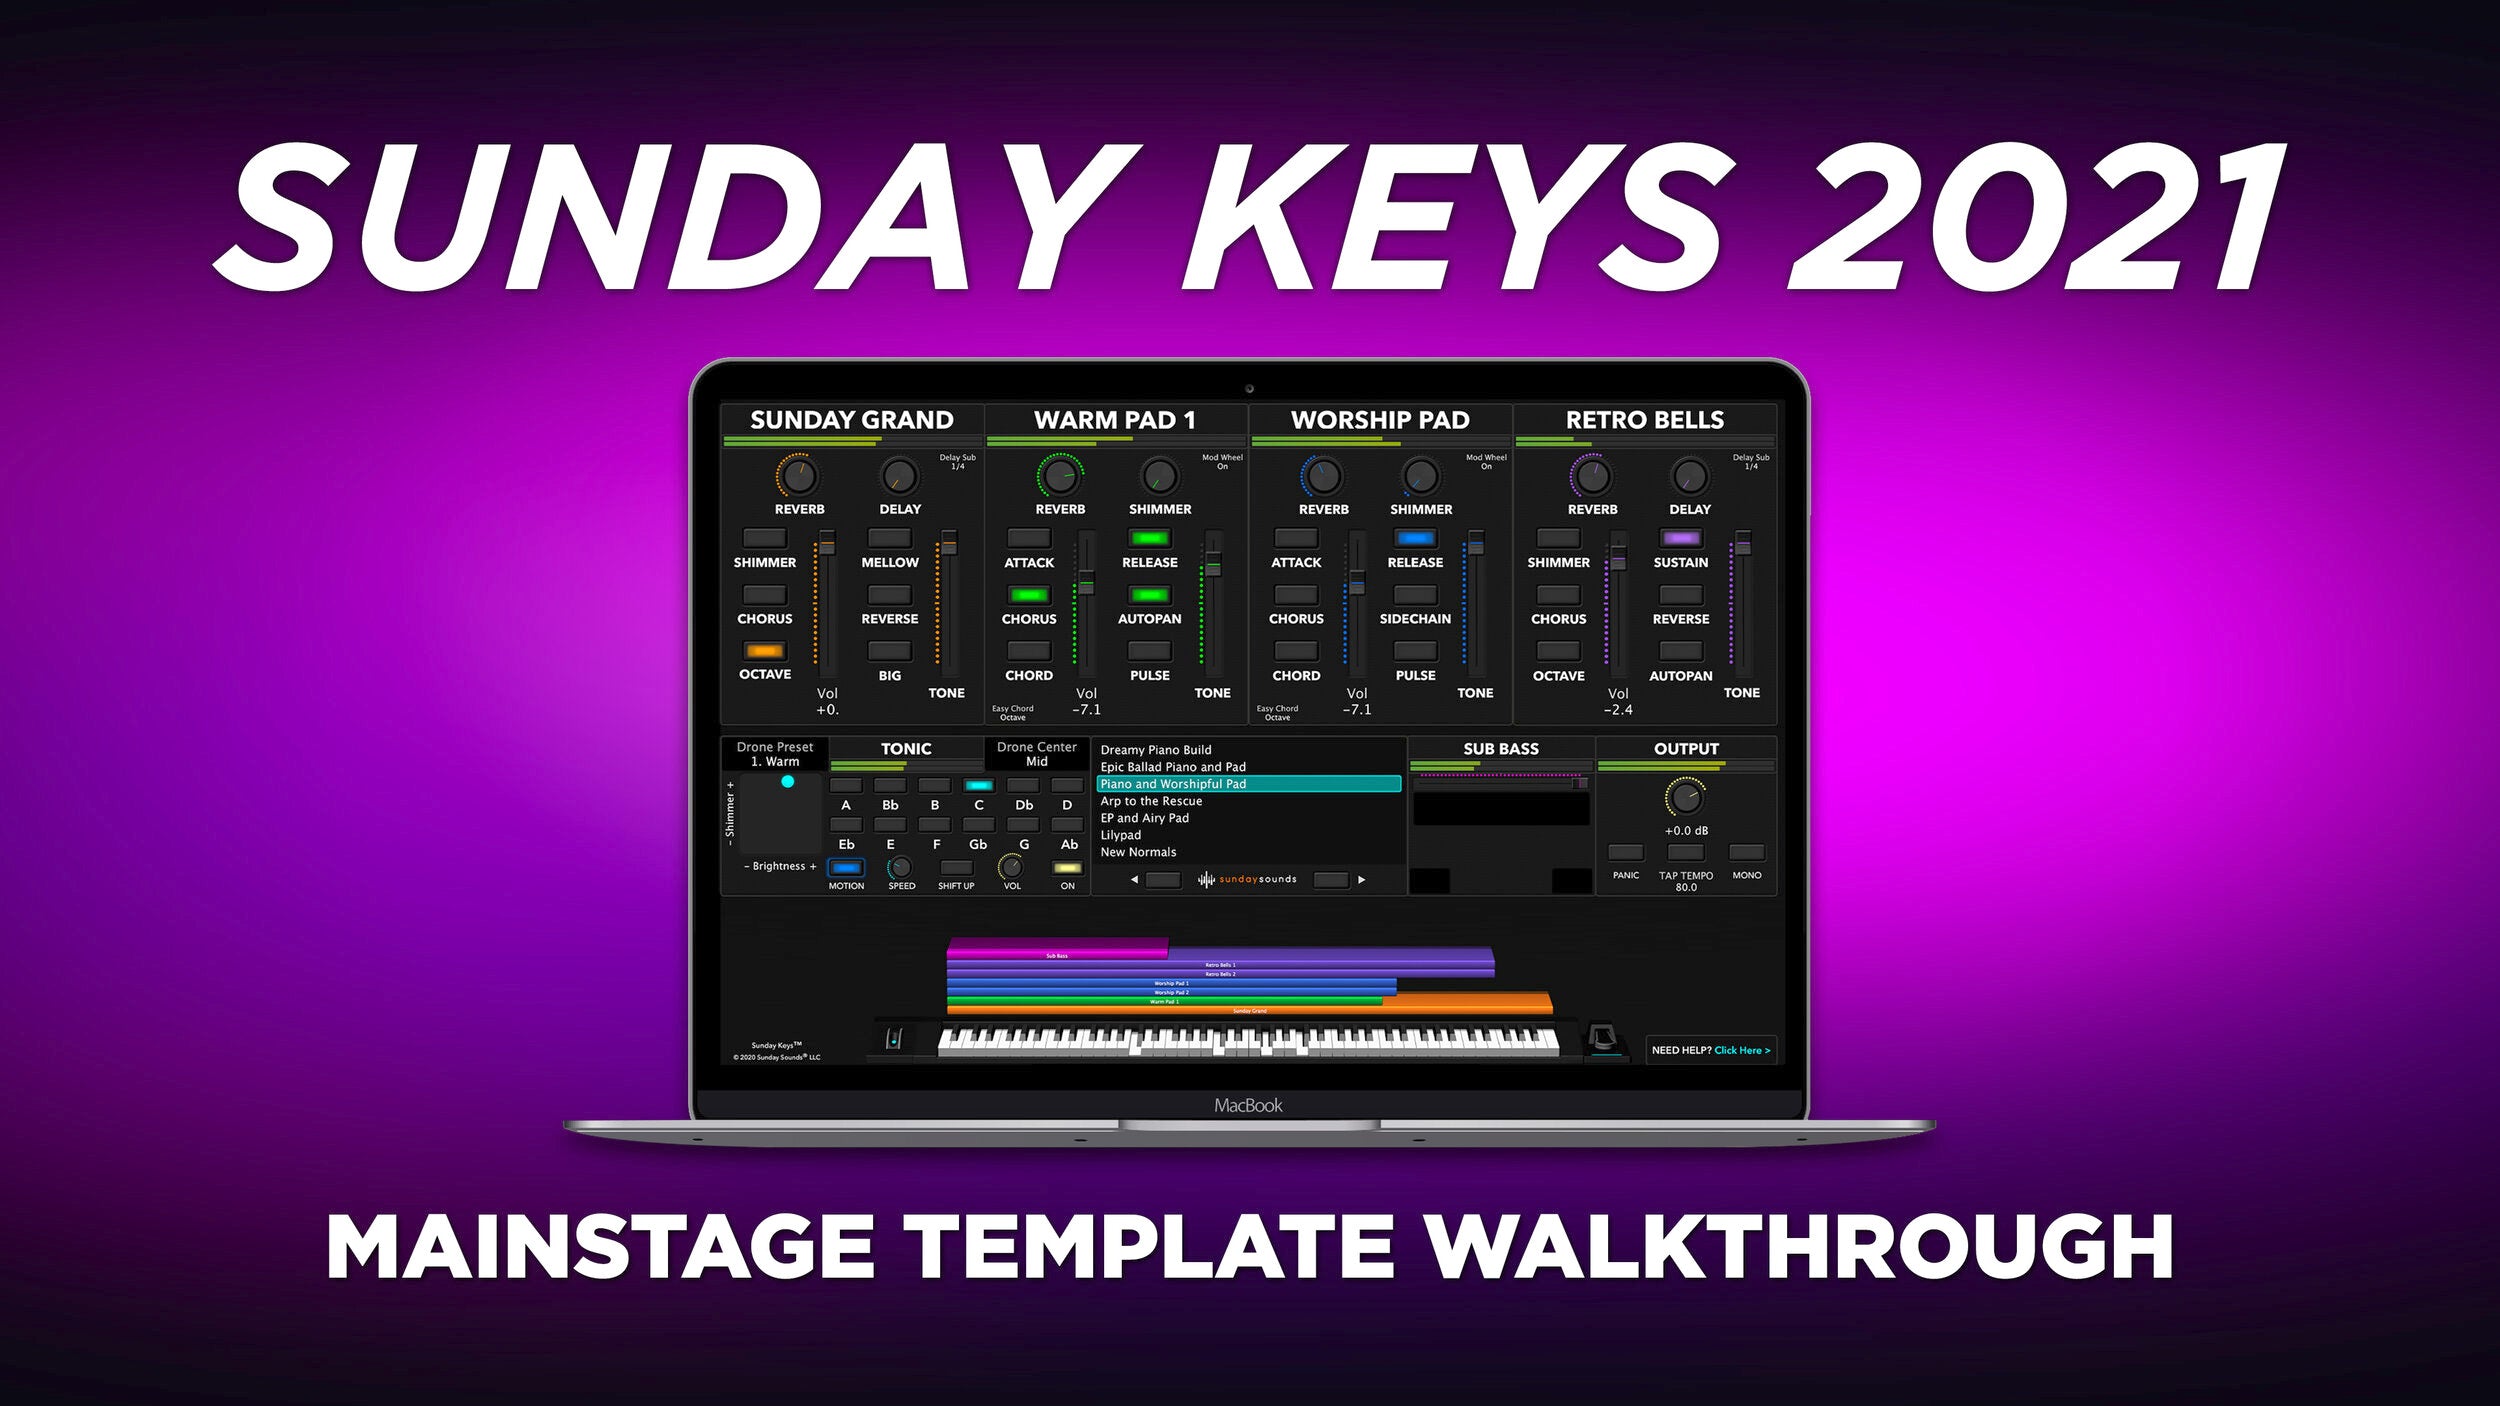 Introducing Sunday Keys 2021 for MainStage!